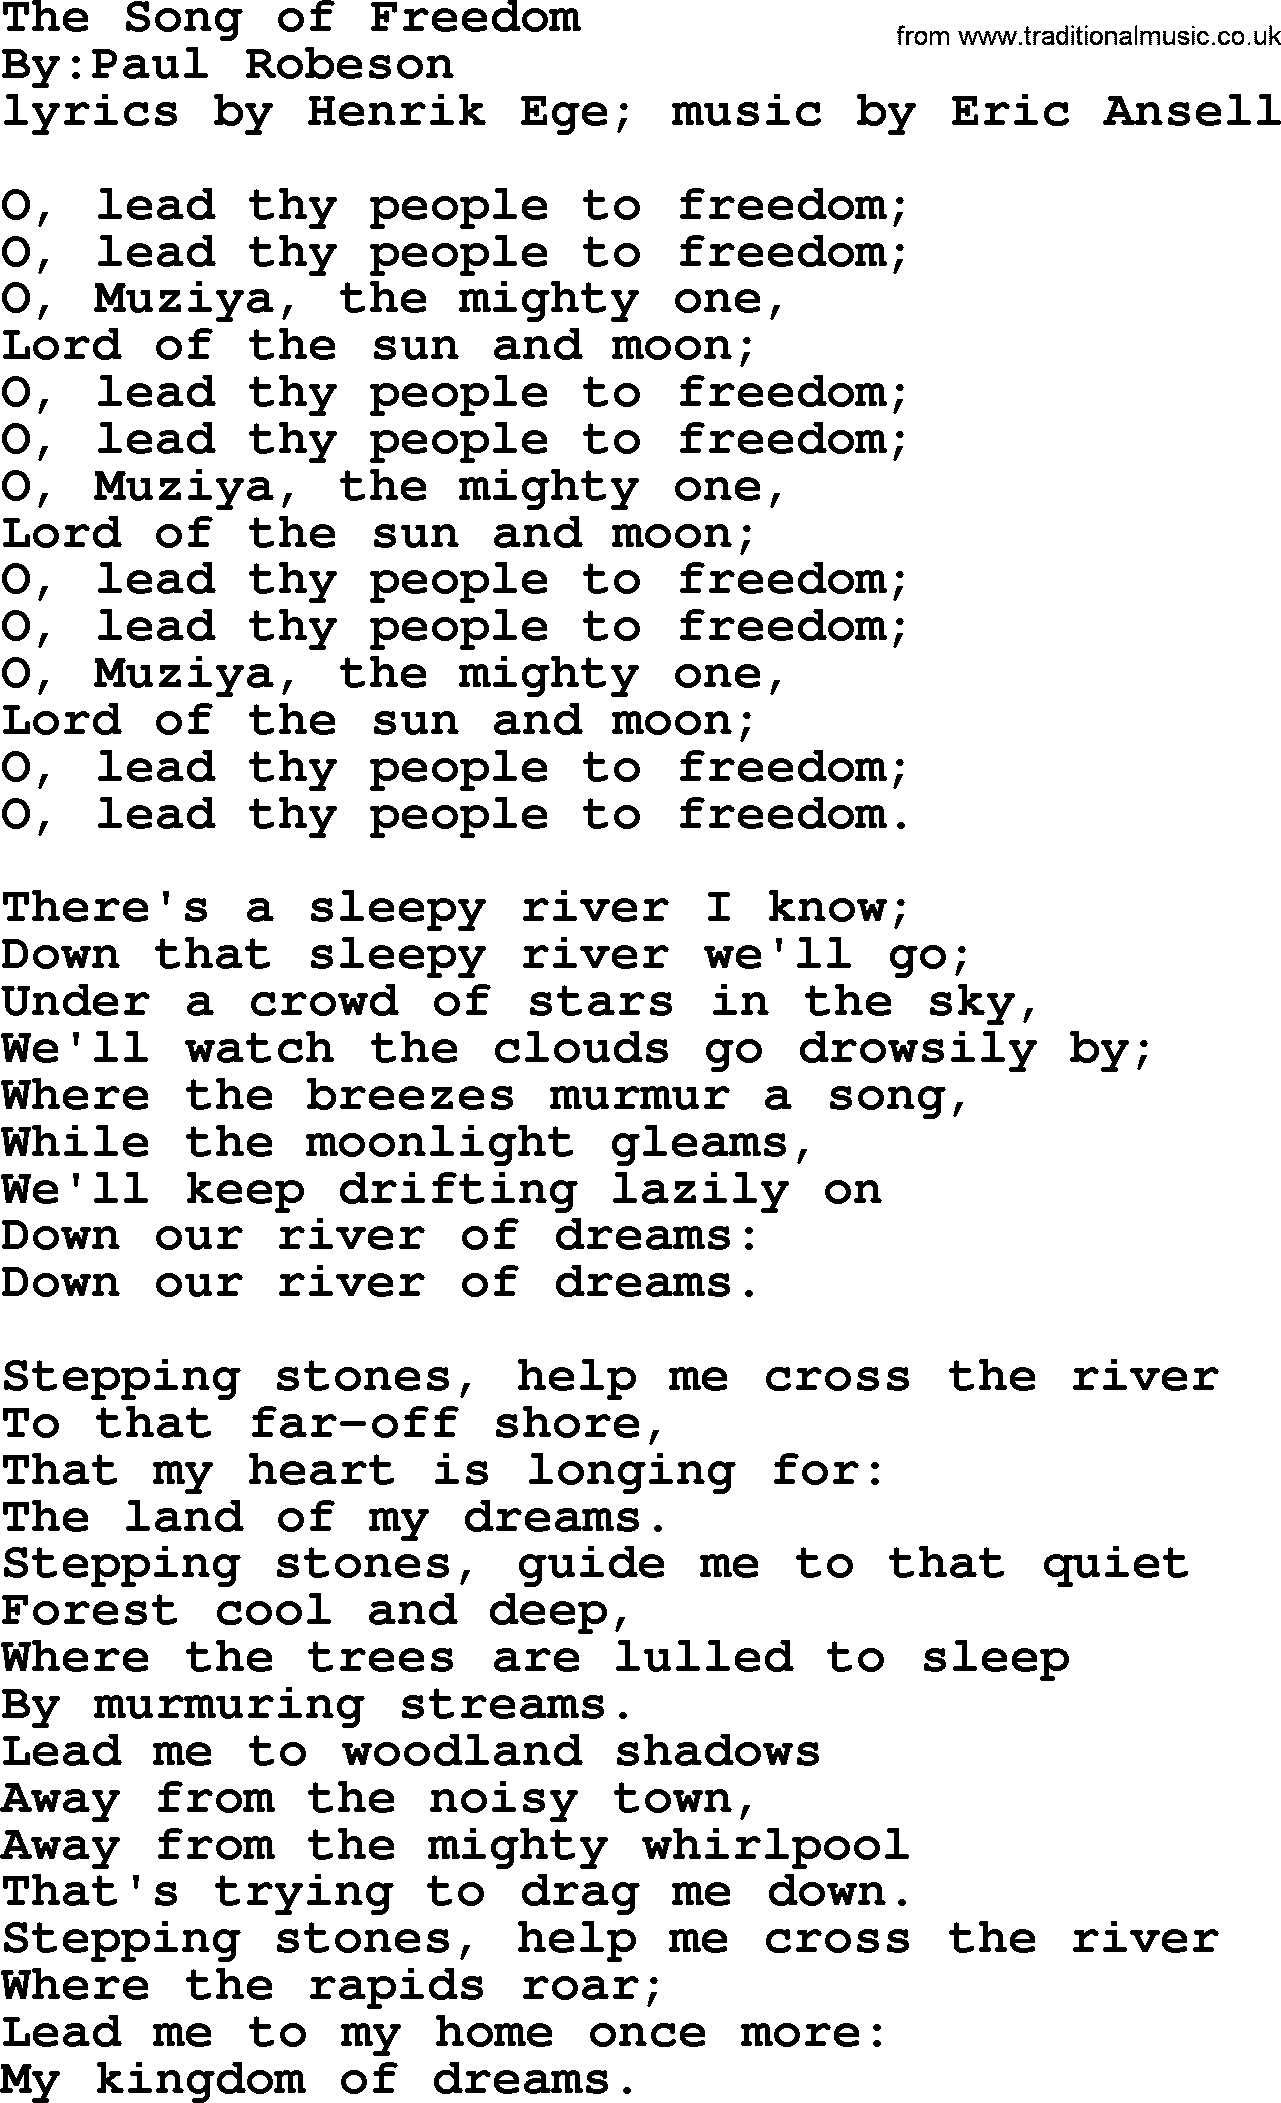 Political, Solidarity, Workers or Union song: The Song Of Freedom, lyrics